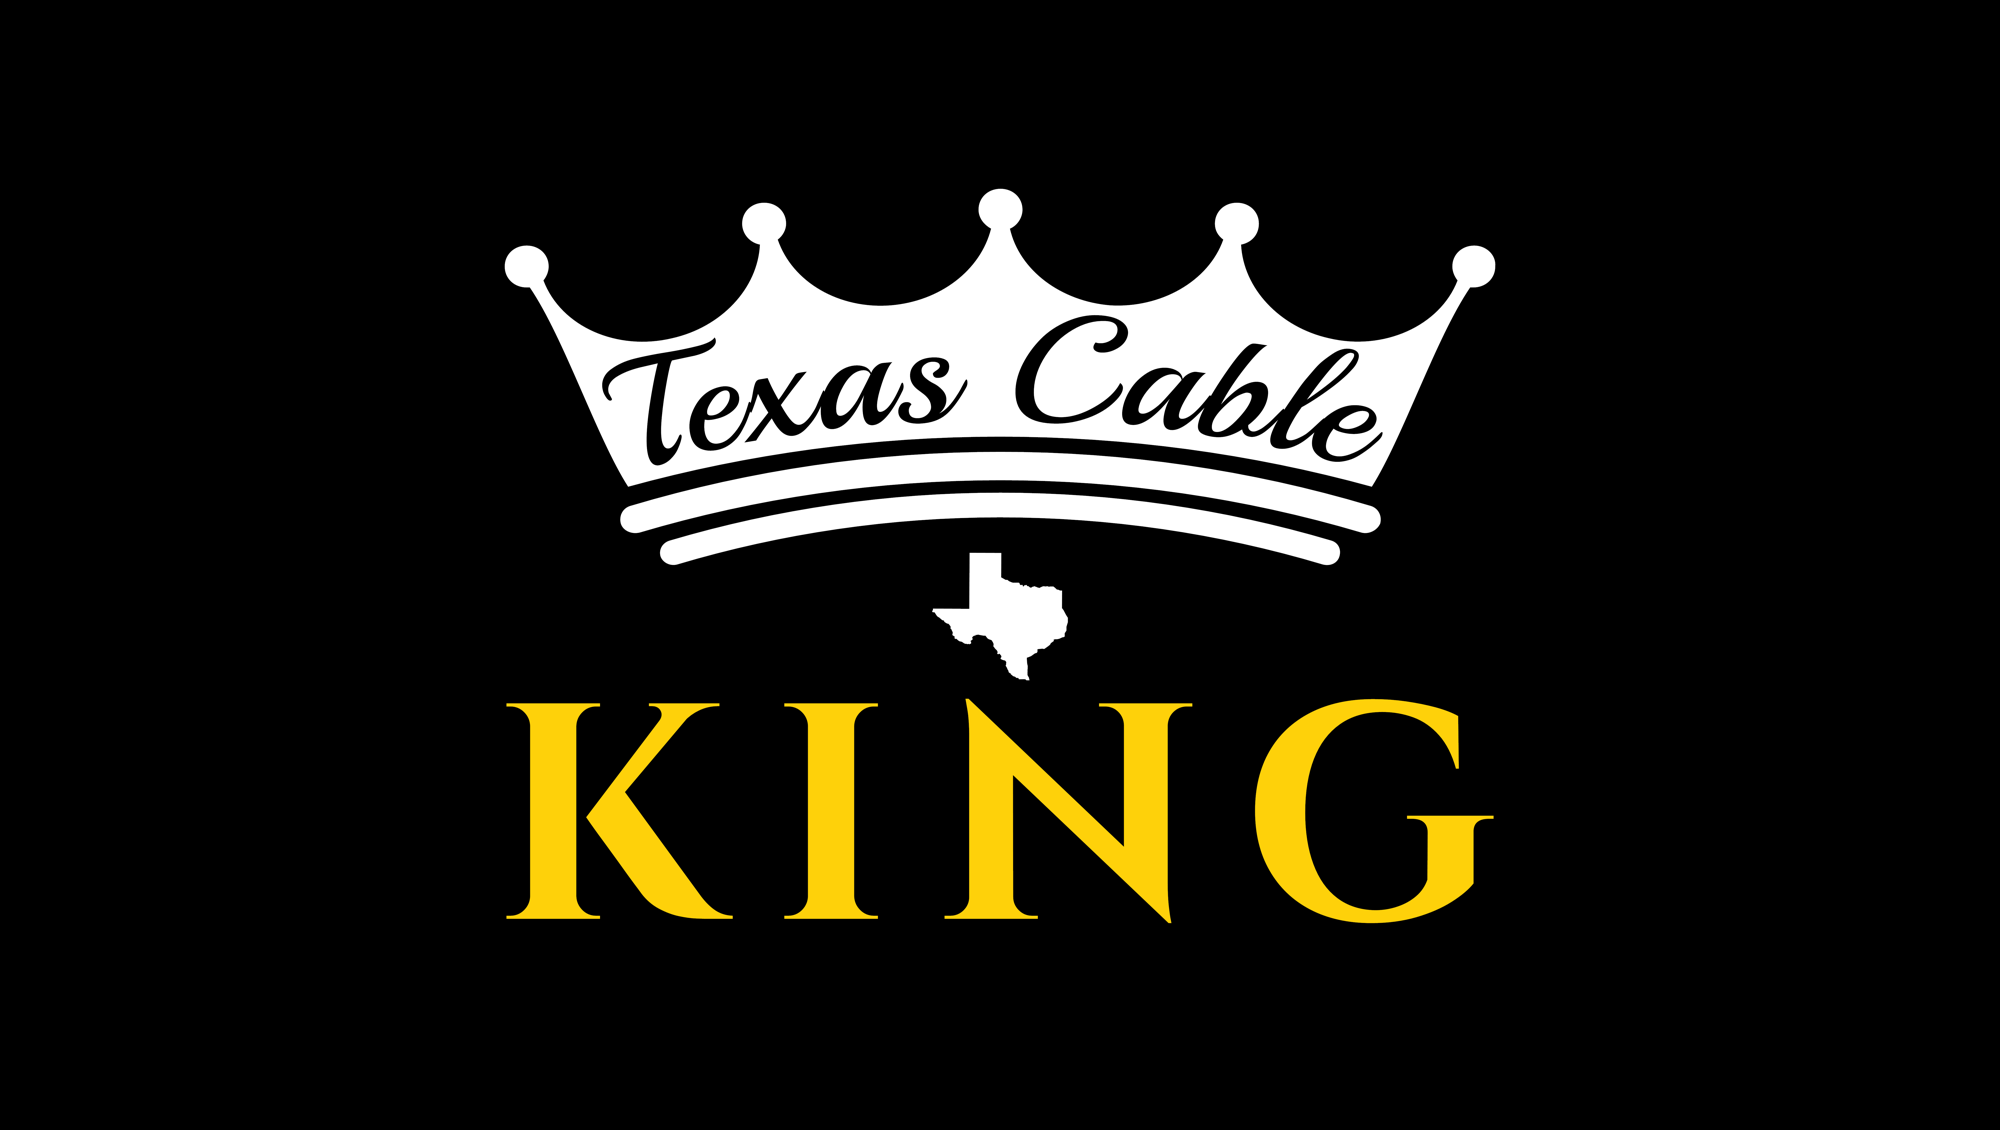 Texas Cable KING